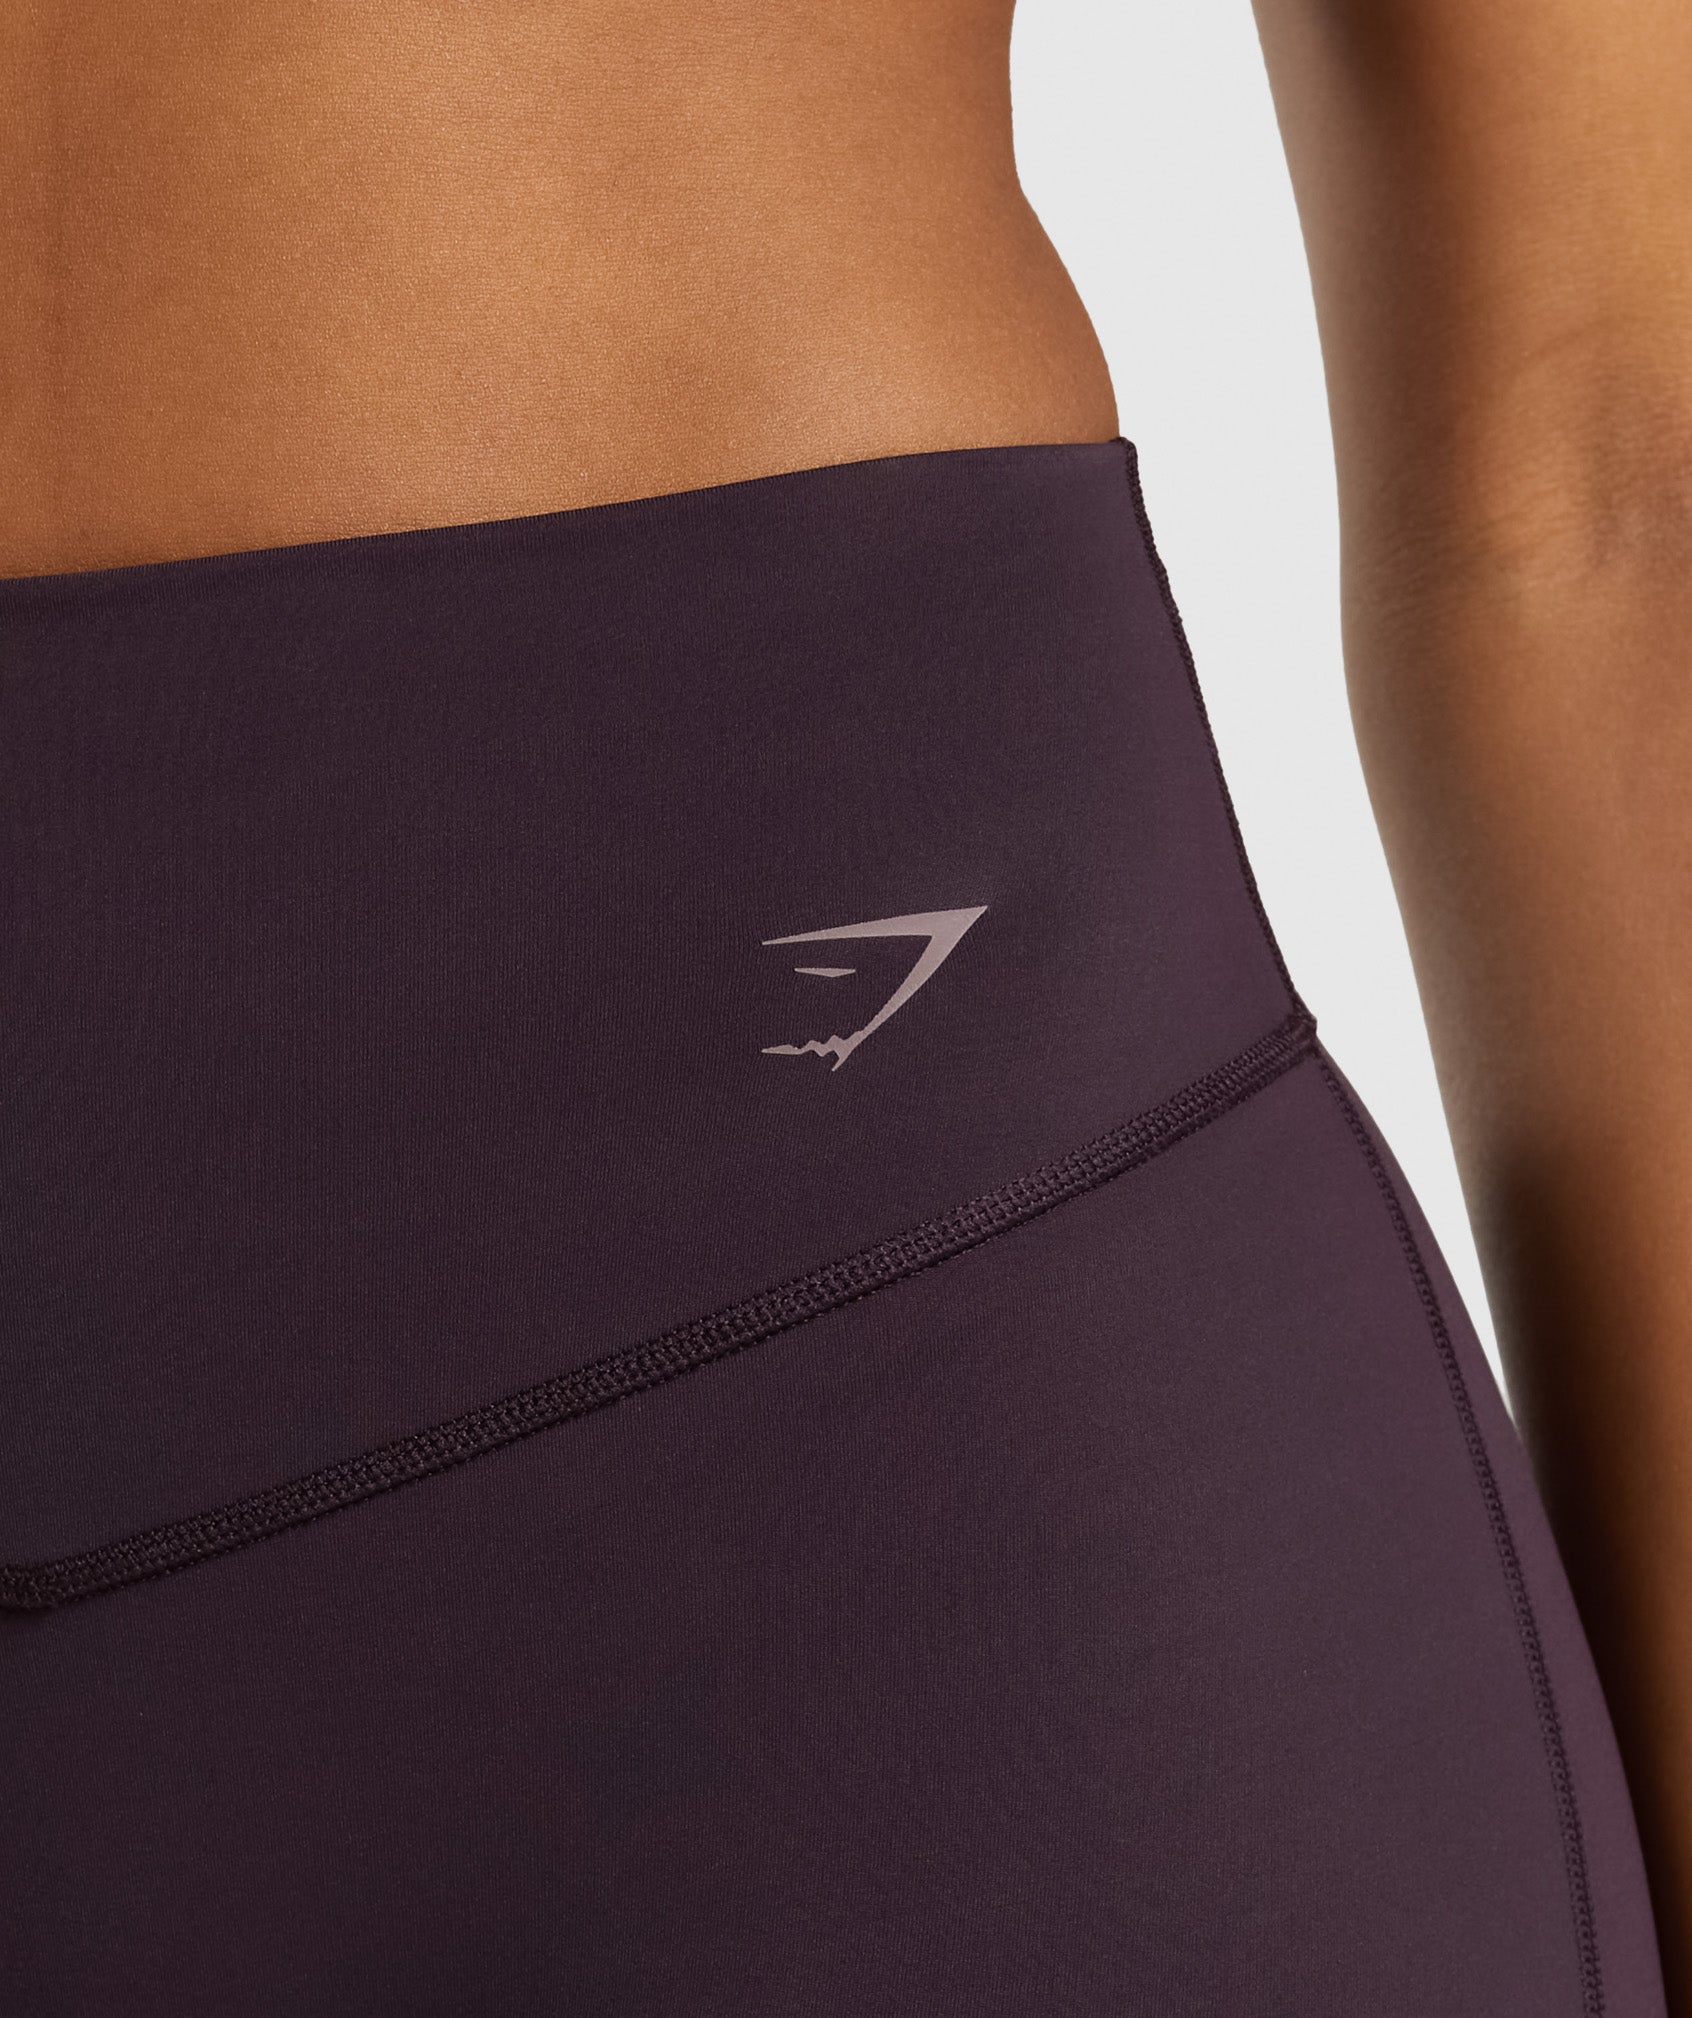 Elevate Shorts in Plum Brown - view 5